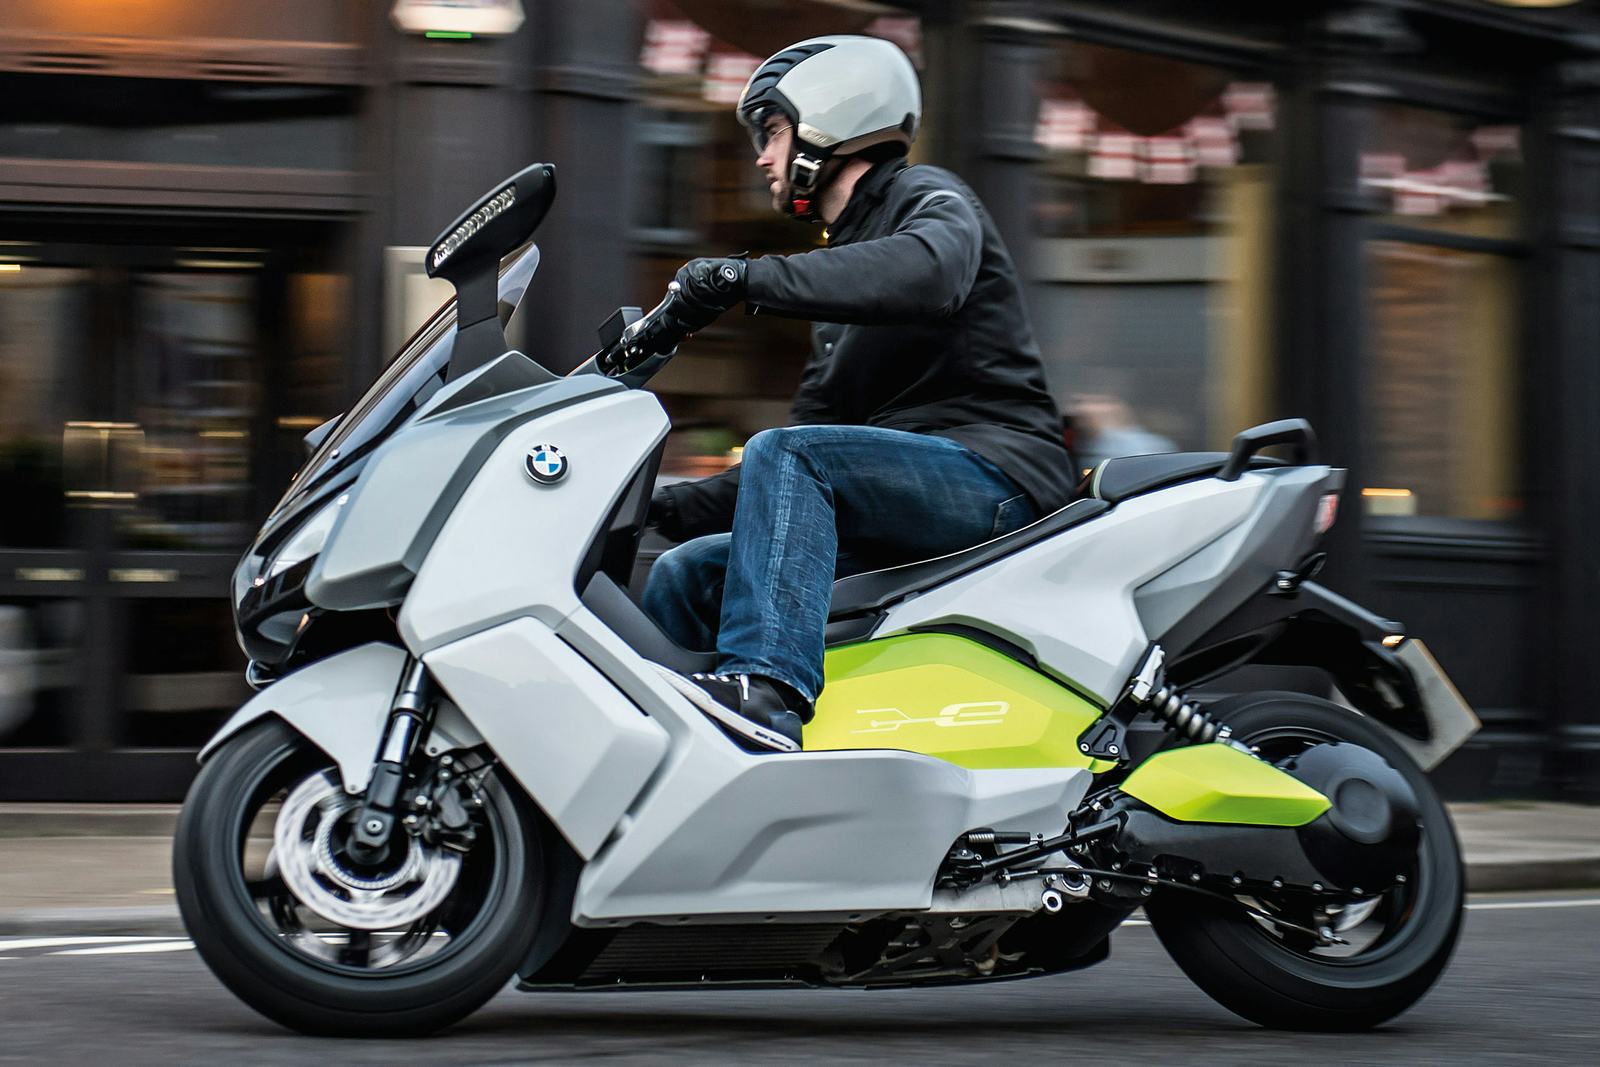 BMW entered the urban mobility segment in 2012 with the C 650 GT and C 600 Sport maxi-scooters. 